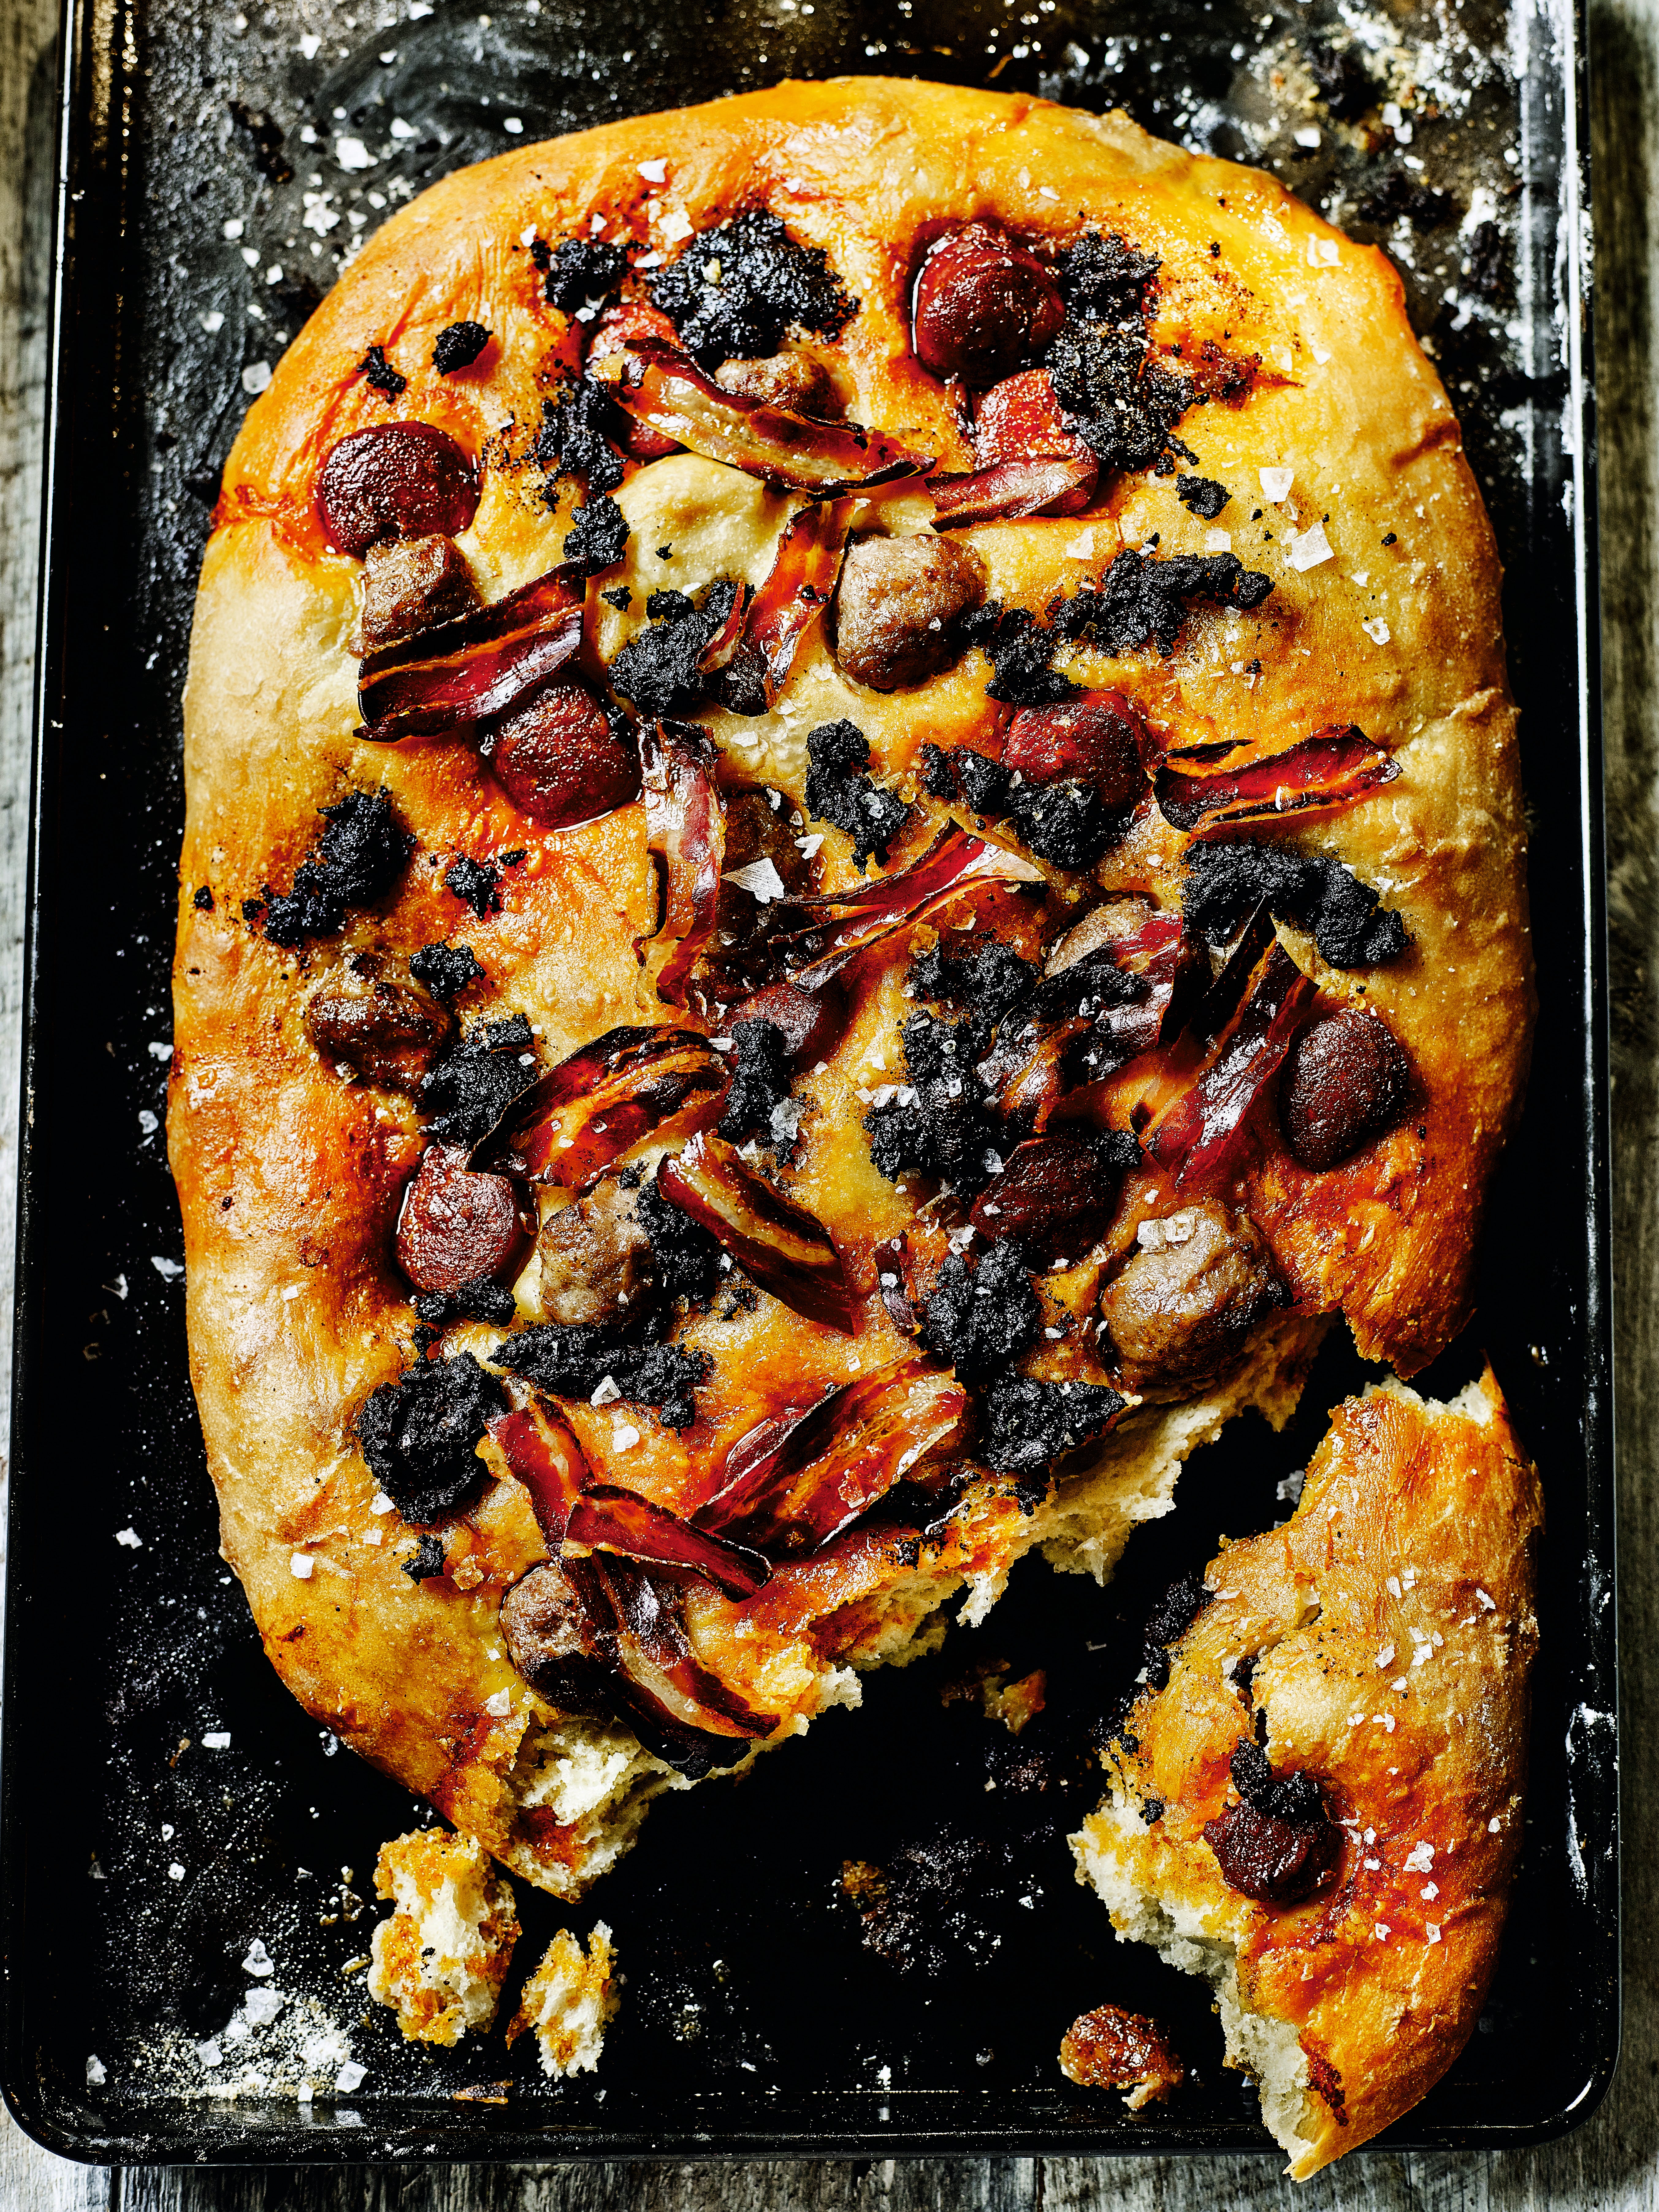 This meat focaccia is kind of like a British toad in the hole